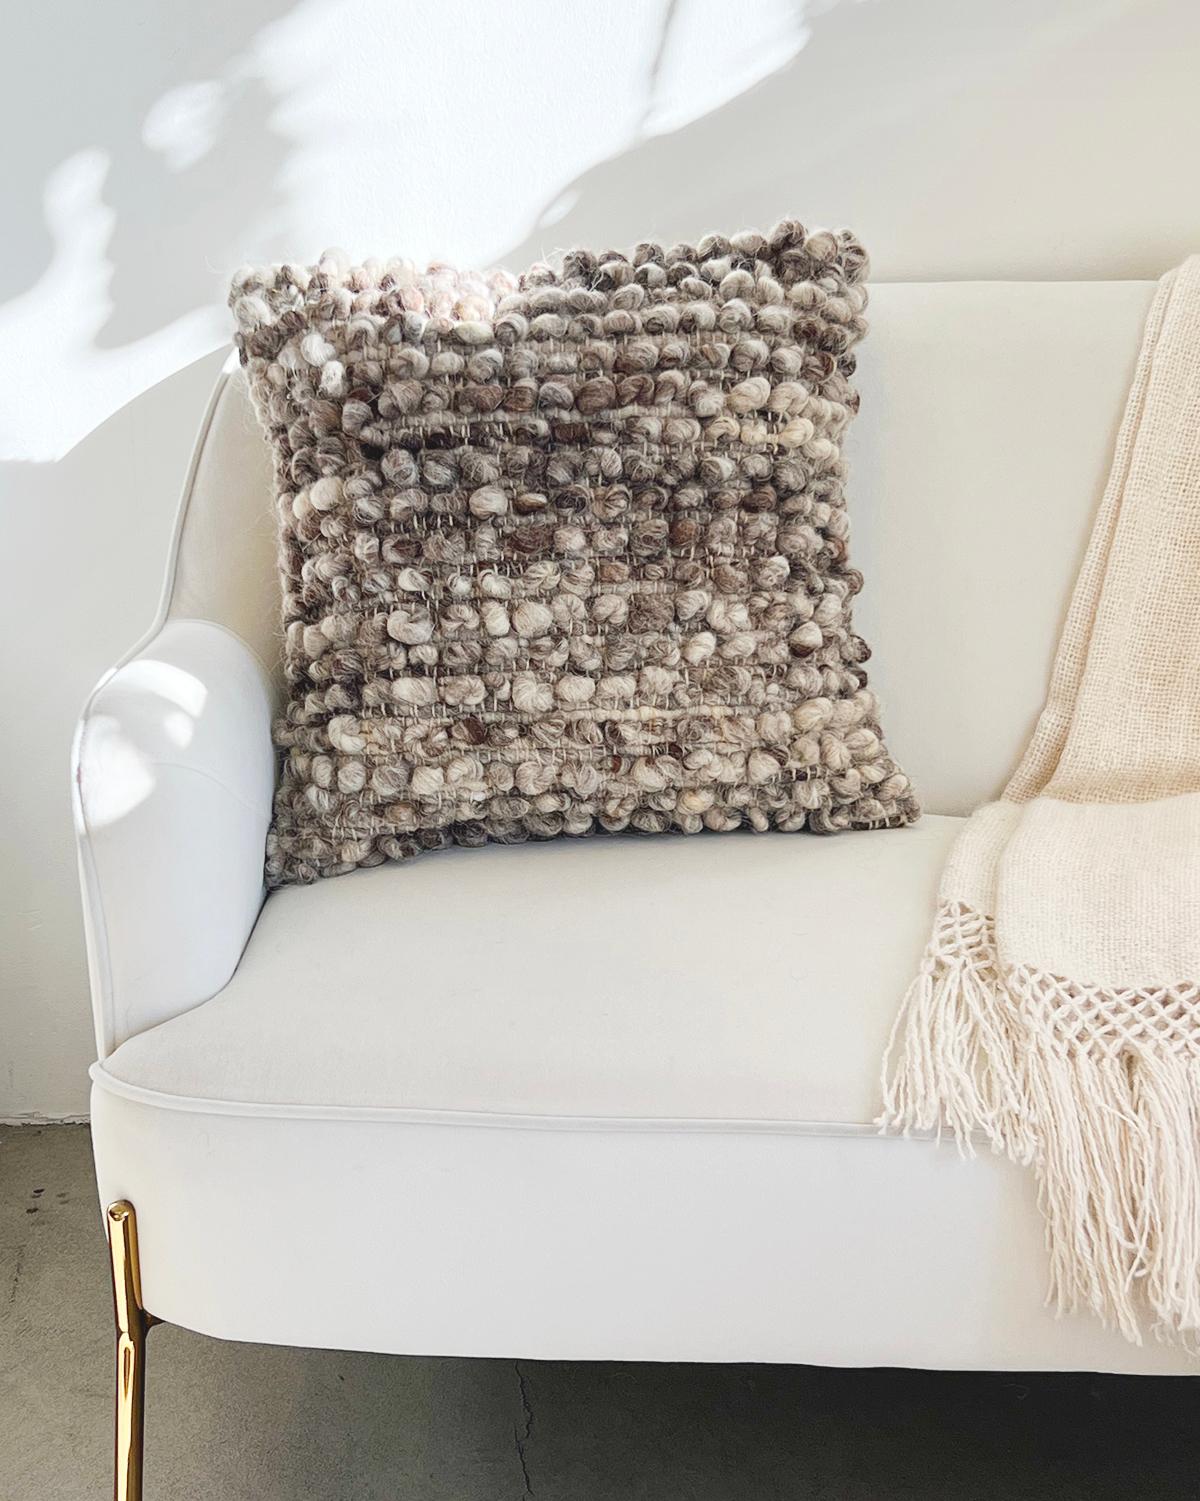 A textured throw pillow for your living room couch. This unique throw pillow features rows of bobbles (balls) made with 100% undyed sheep wool for a truly textured and cozy look. These cushions are handmade by Fatima in Portugal with wool from local